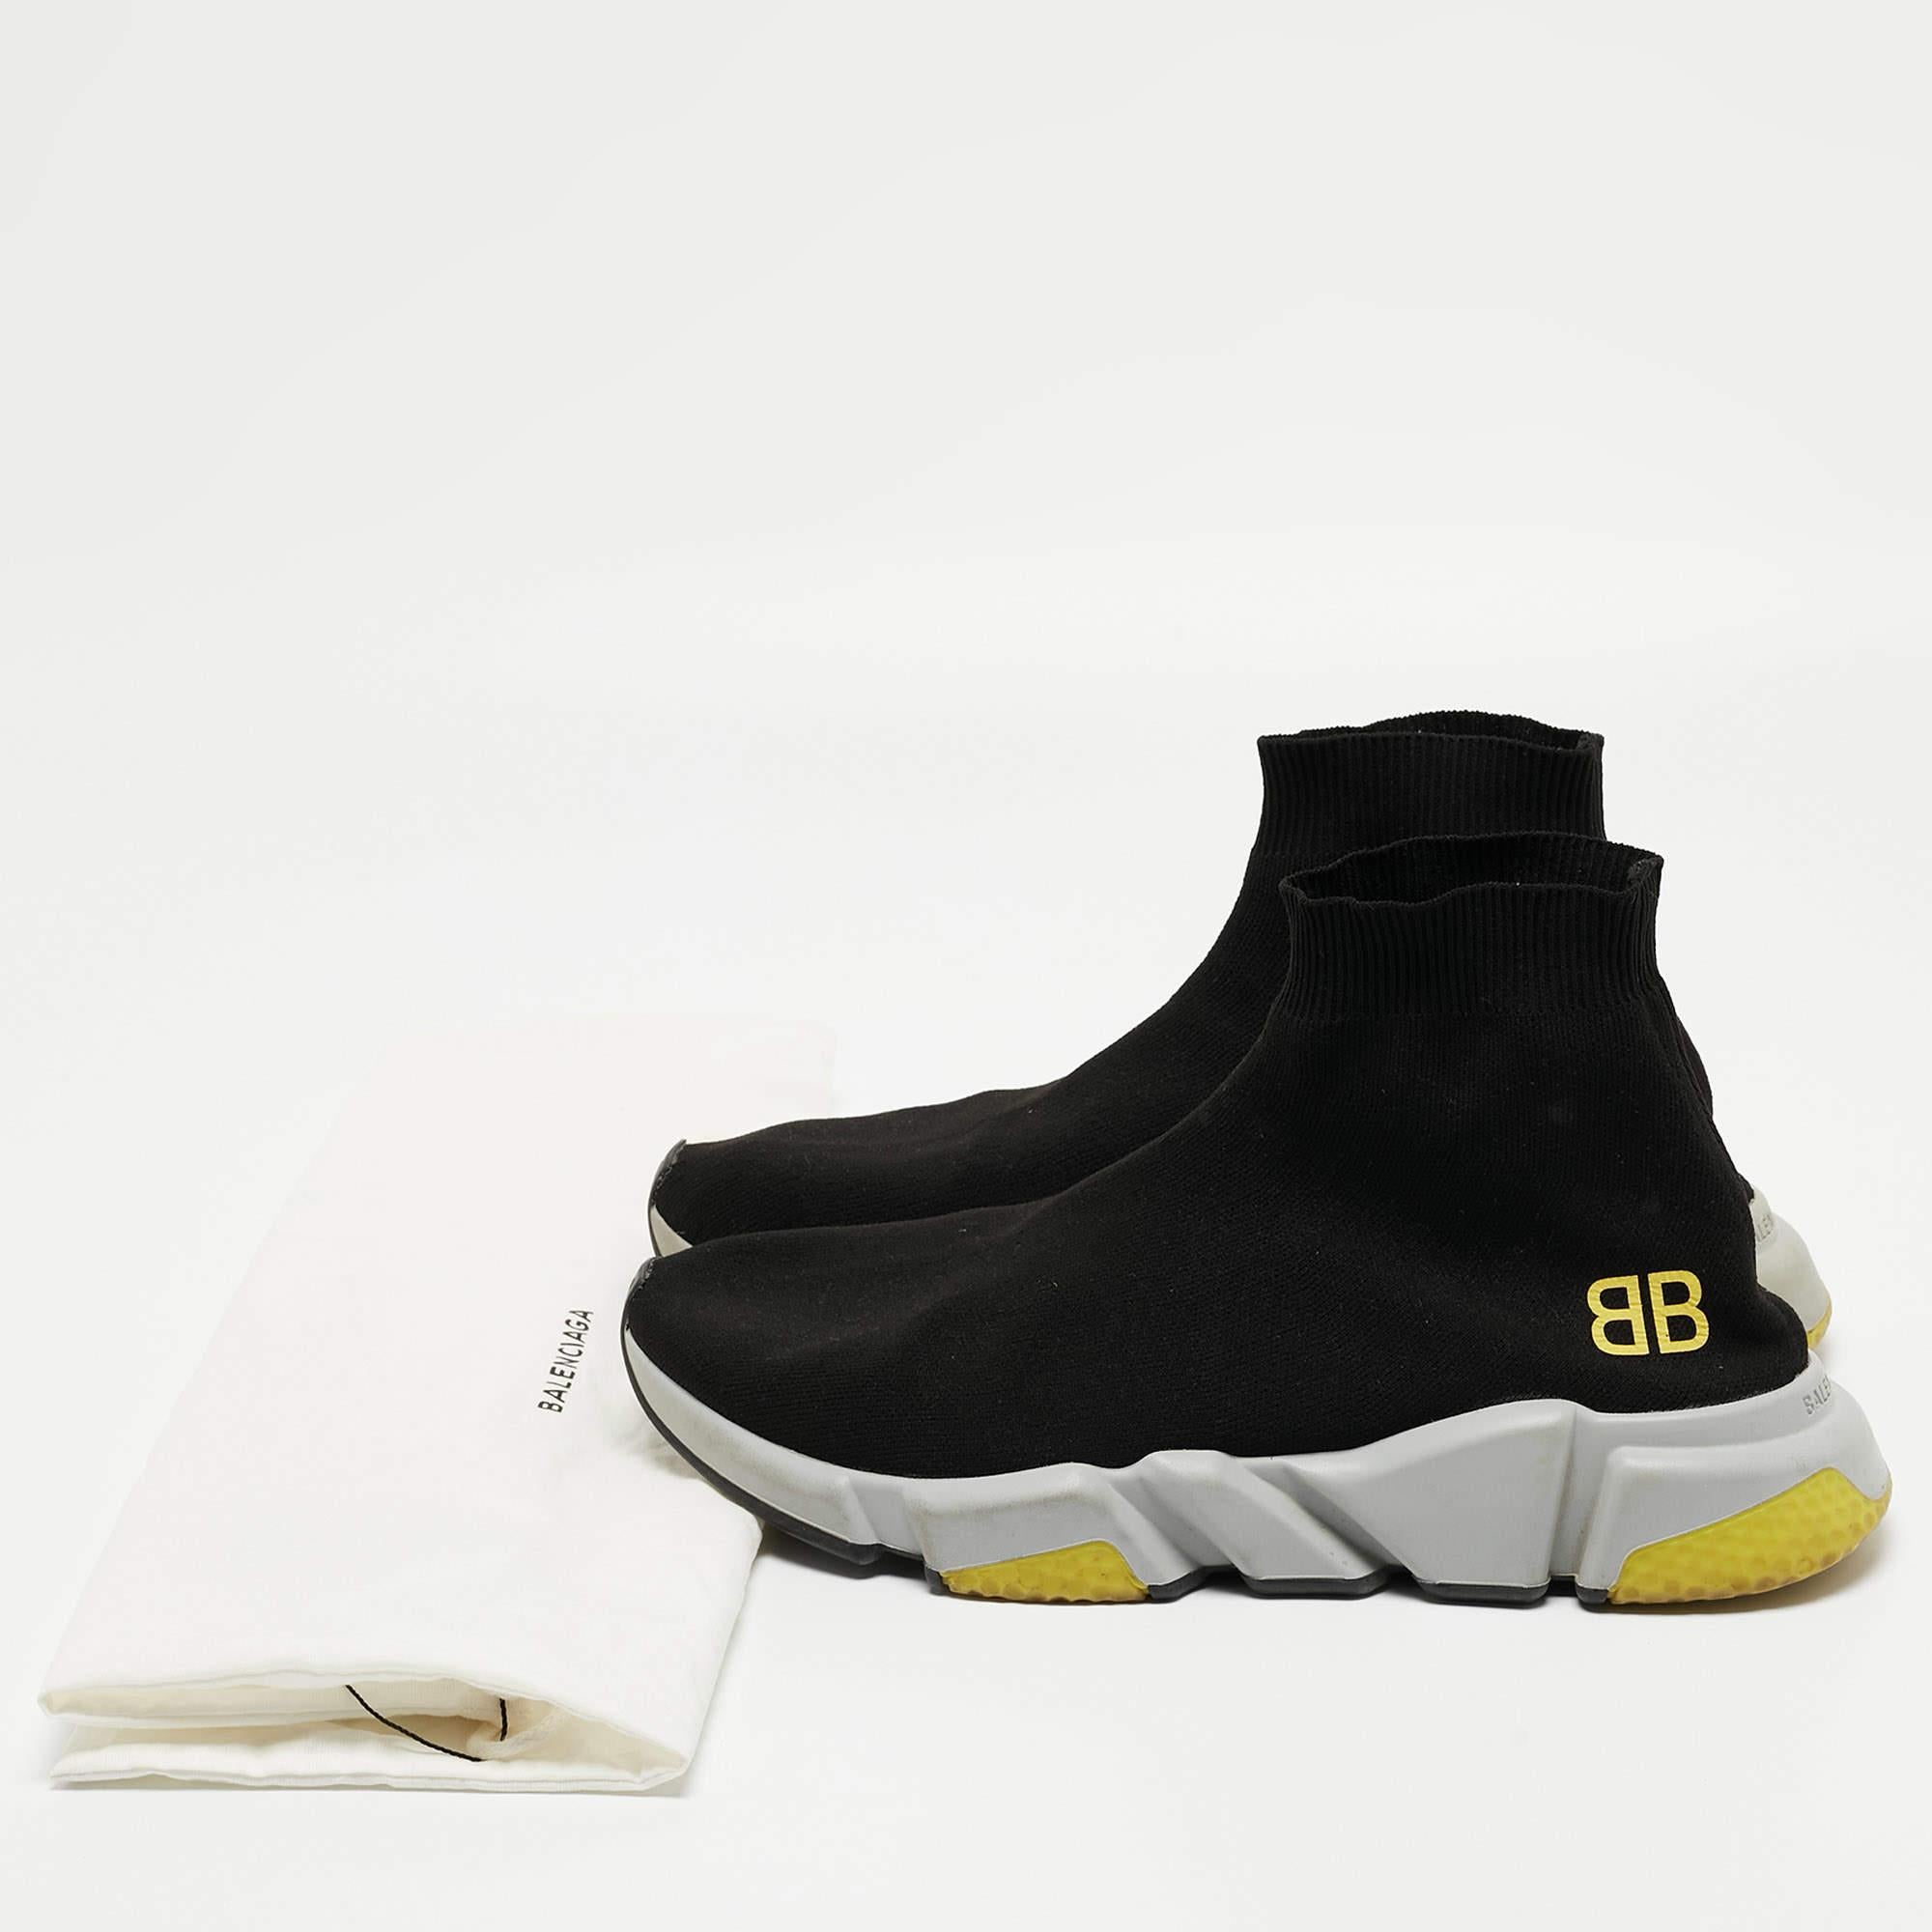 Balenciaga Black Knit Fabric BB Speed Trainer Sneakers Size 43 For Sale 4